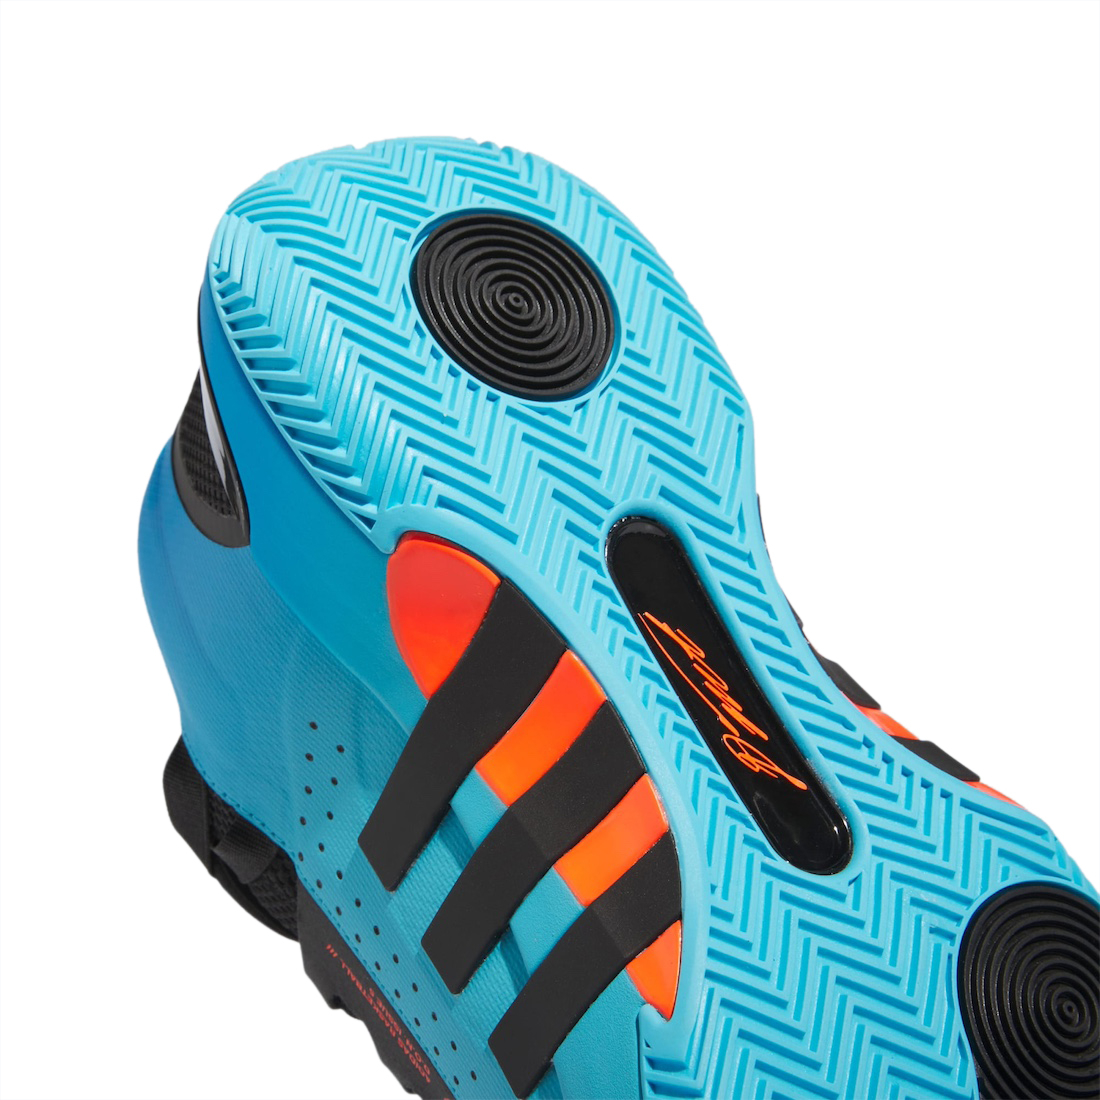 adidas DON Issue 5 Bright Cyan - Oct 2023 - IE8325